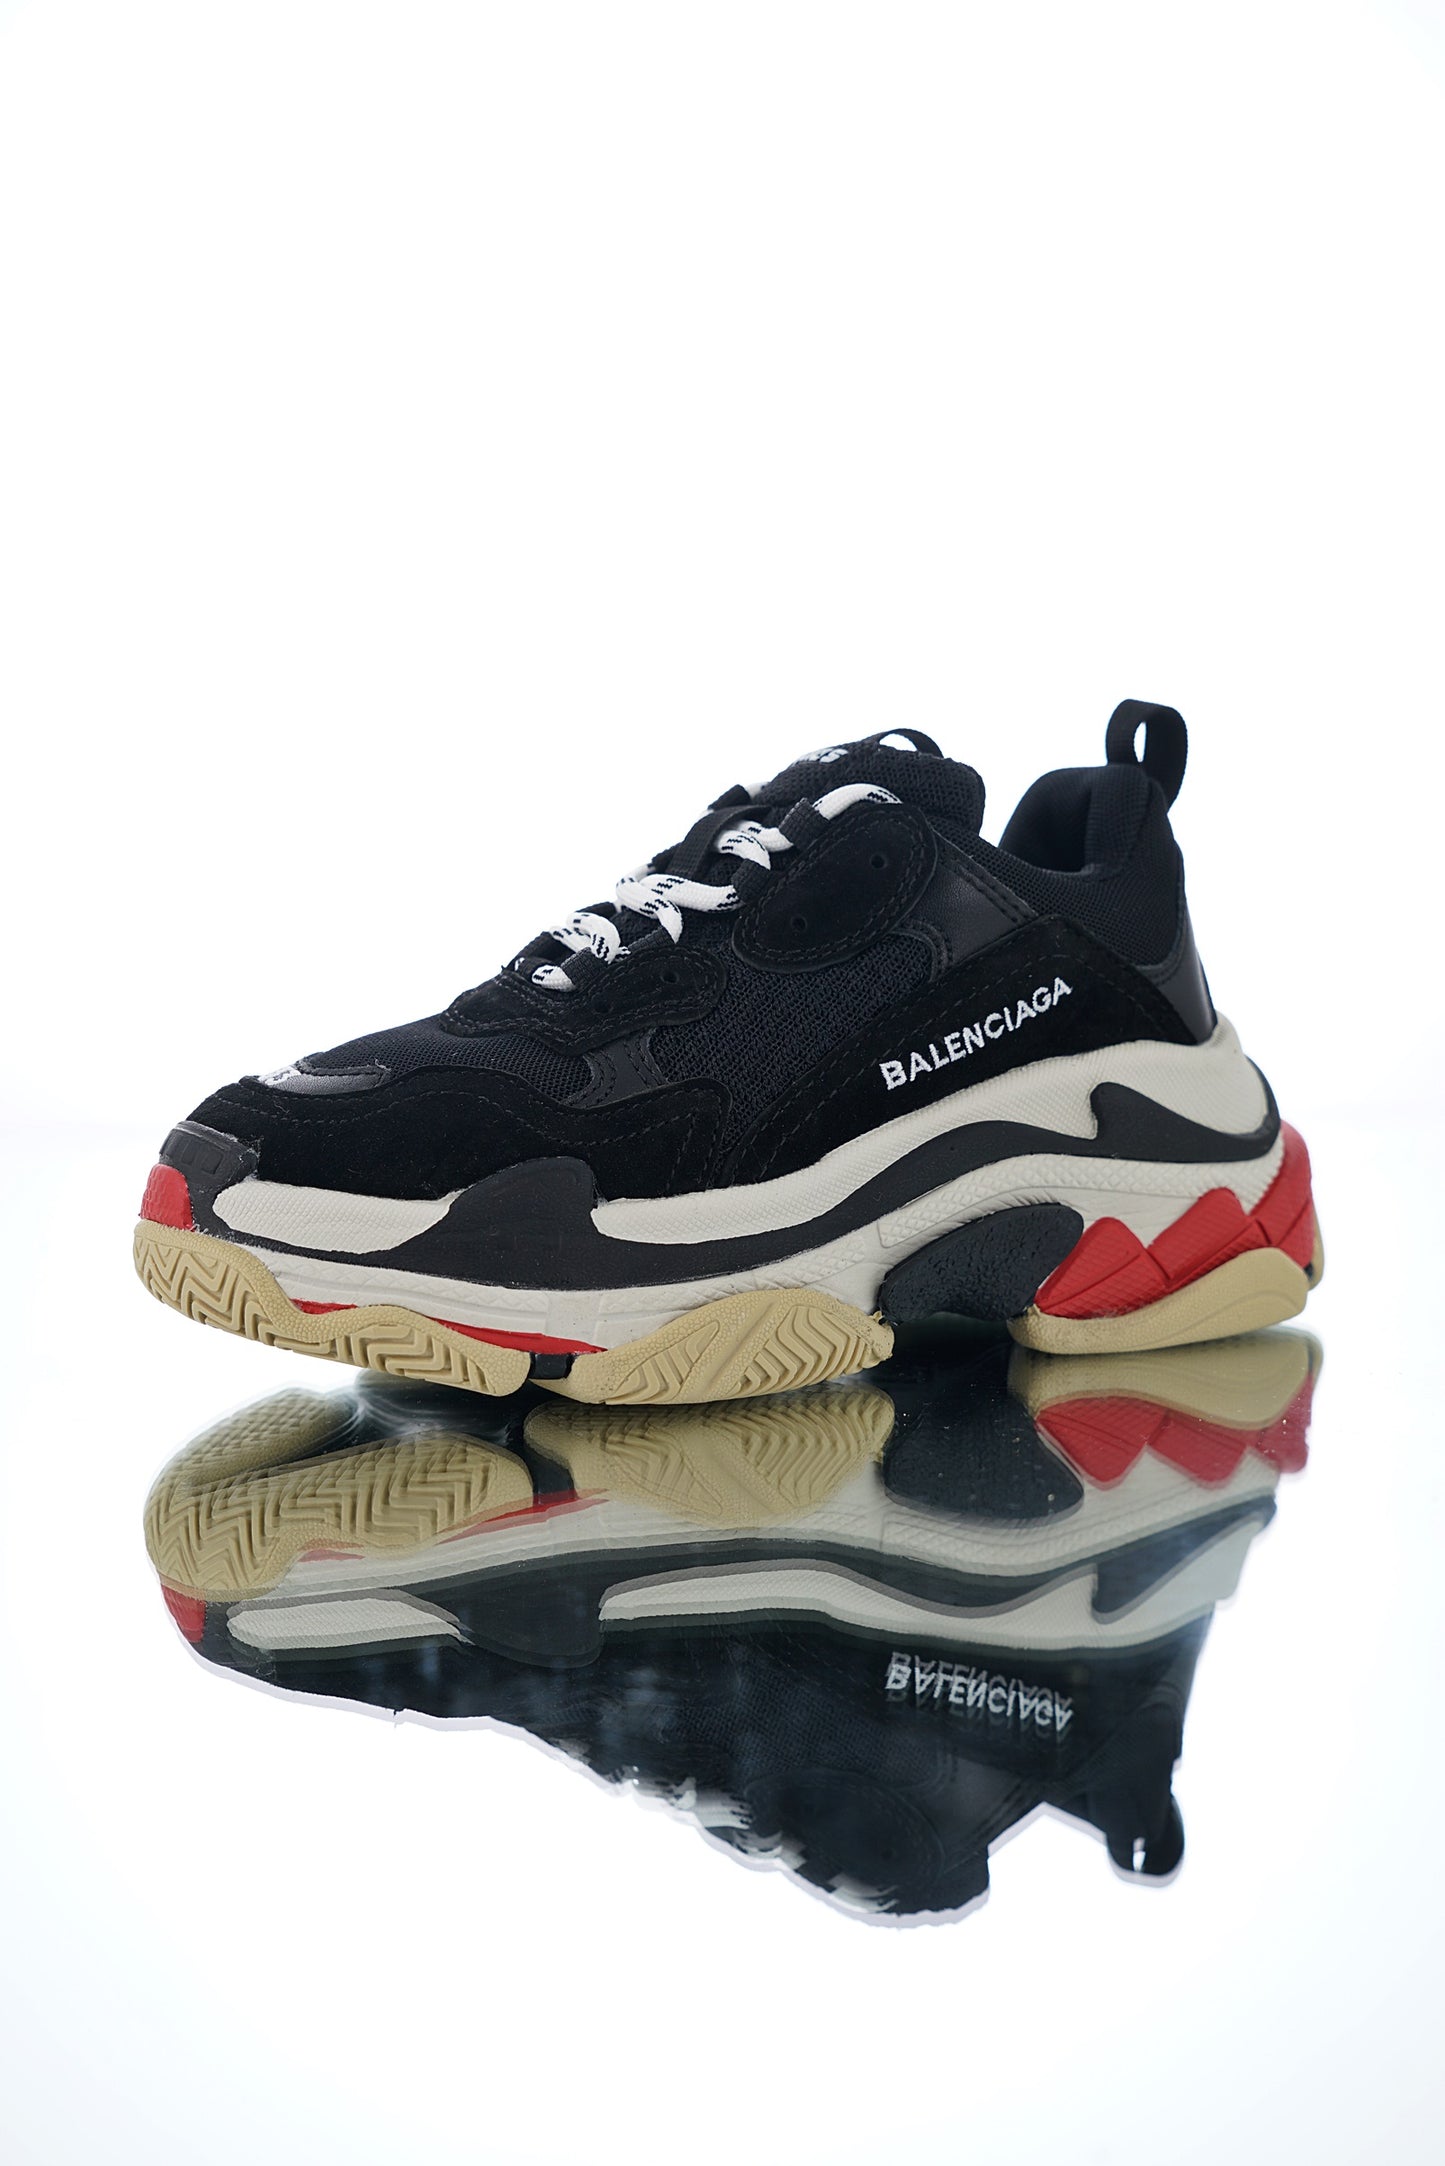 Triple s black and red solid sole - whatever on 